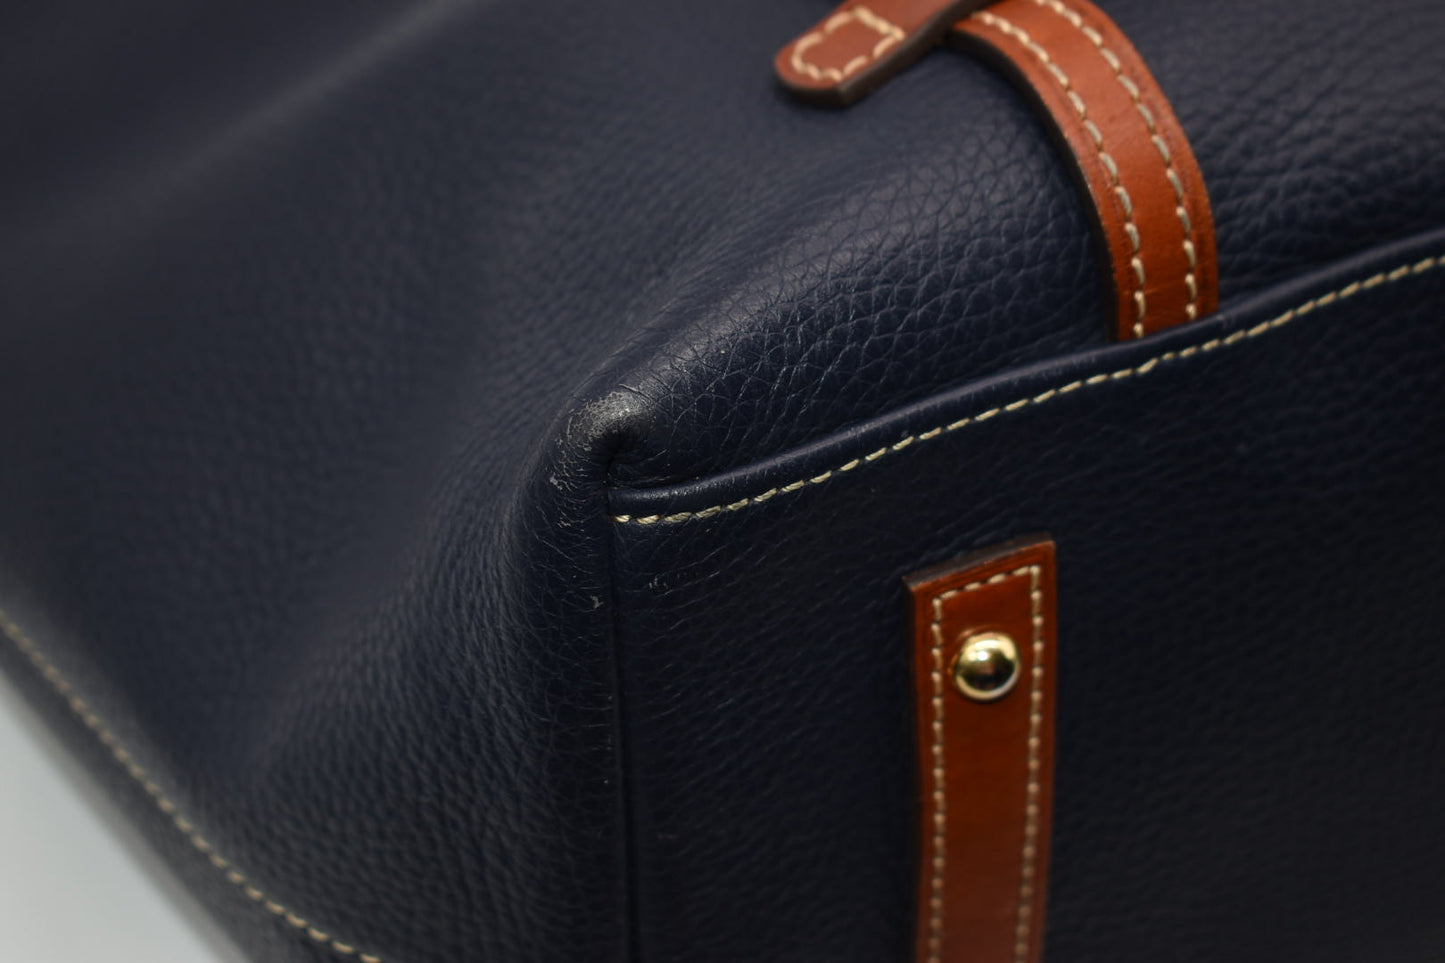 Dooney & Bourke Pebbled Leather Tote Bag in Navy Blue